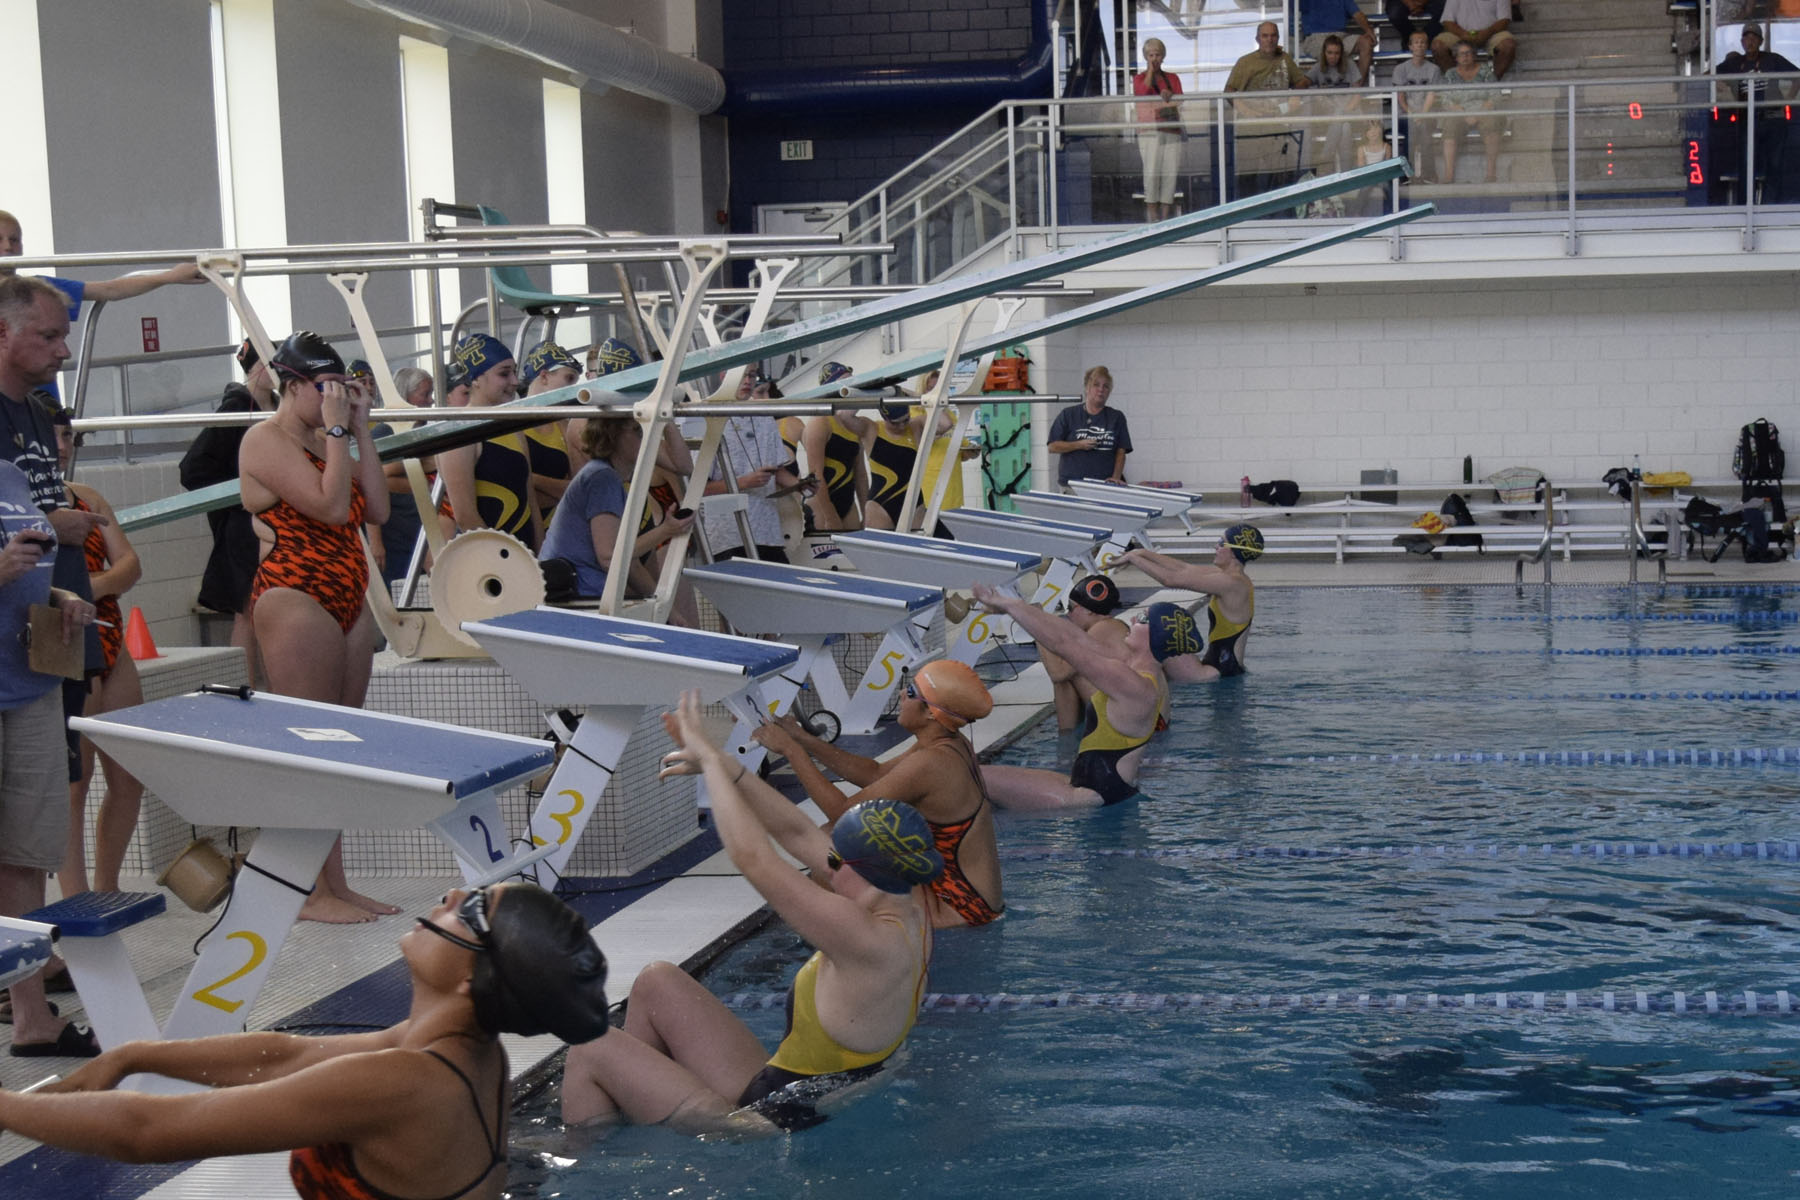 Manistee Chippewas Girls Swimming Team in Pool at competition meet on starting blocks